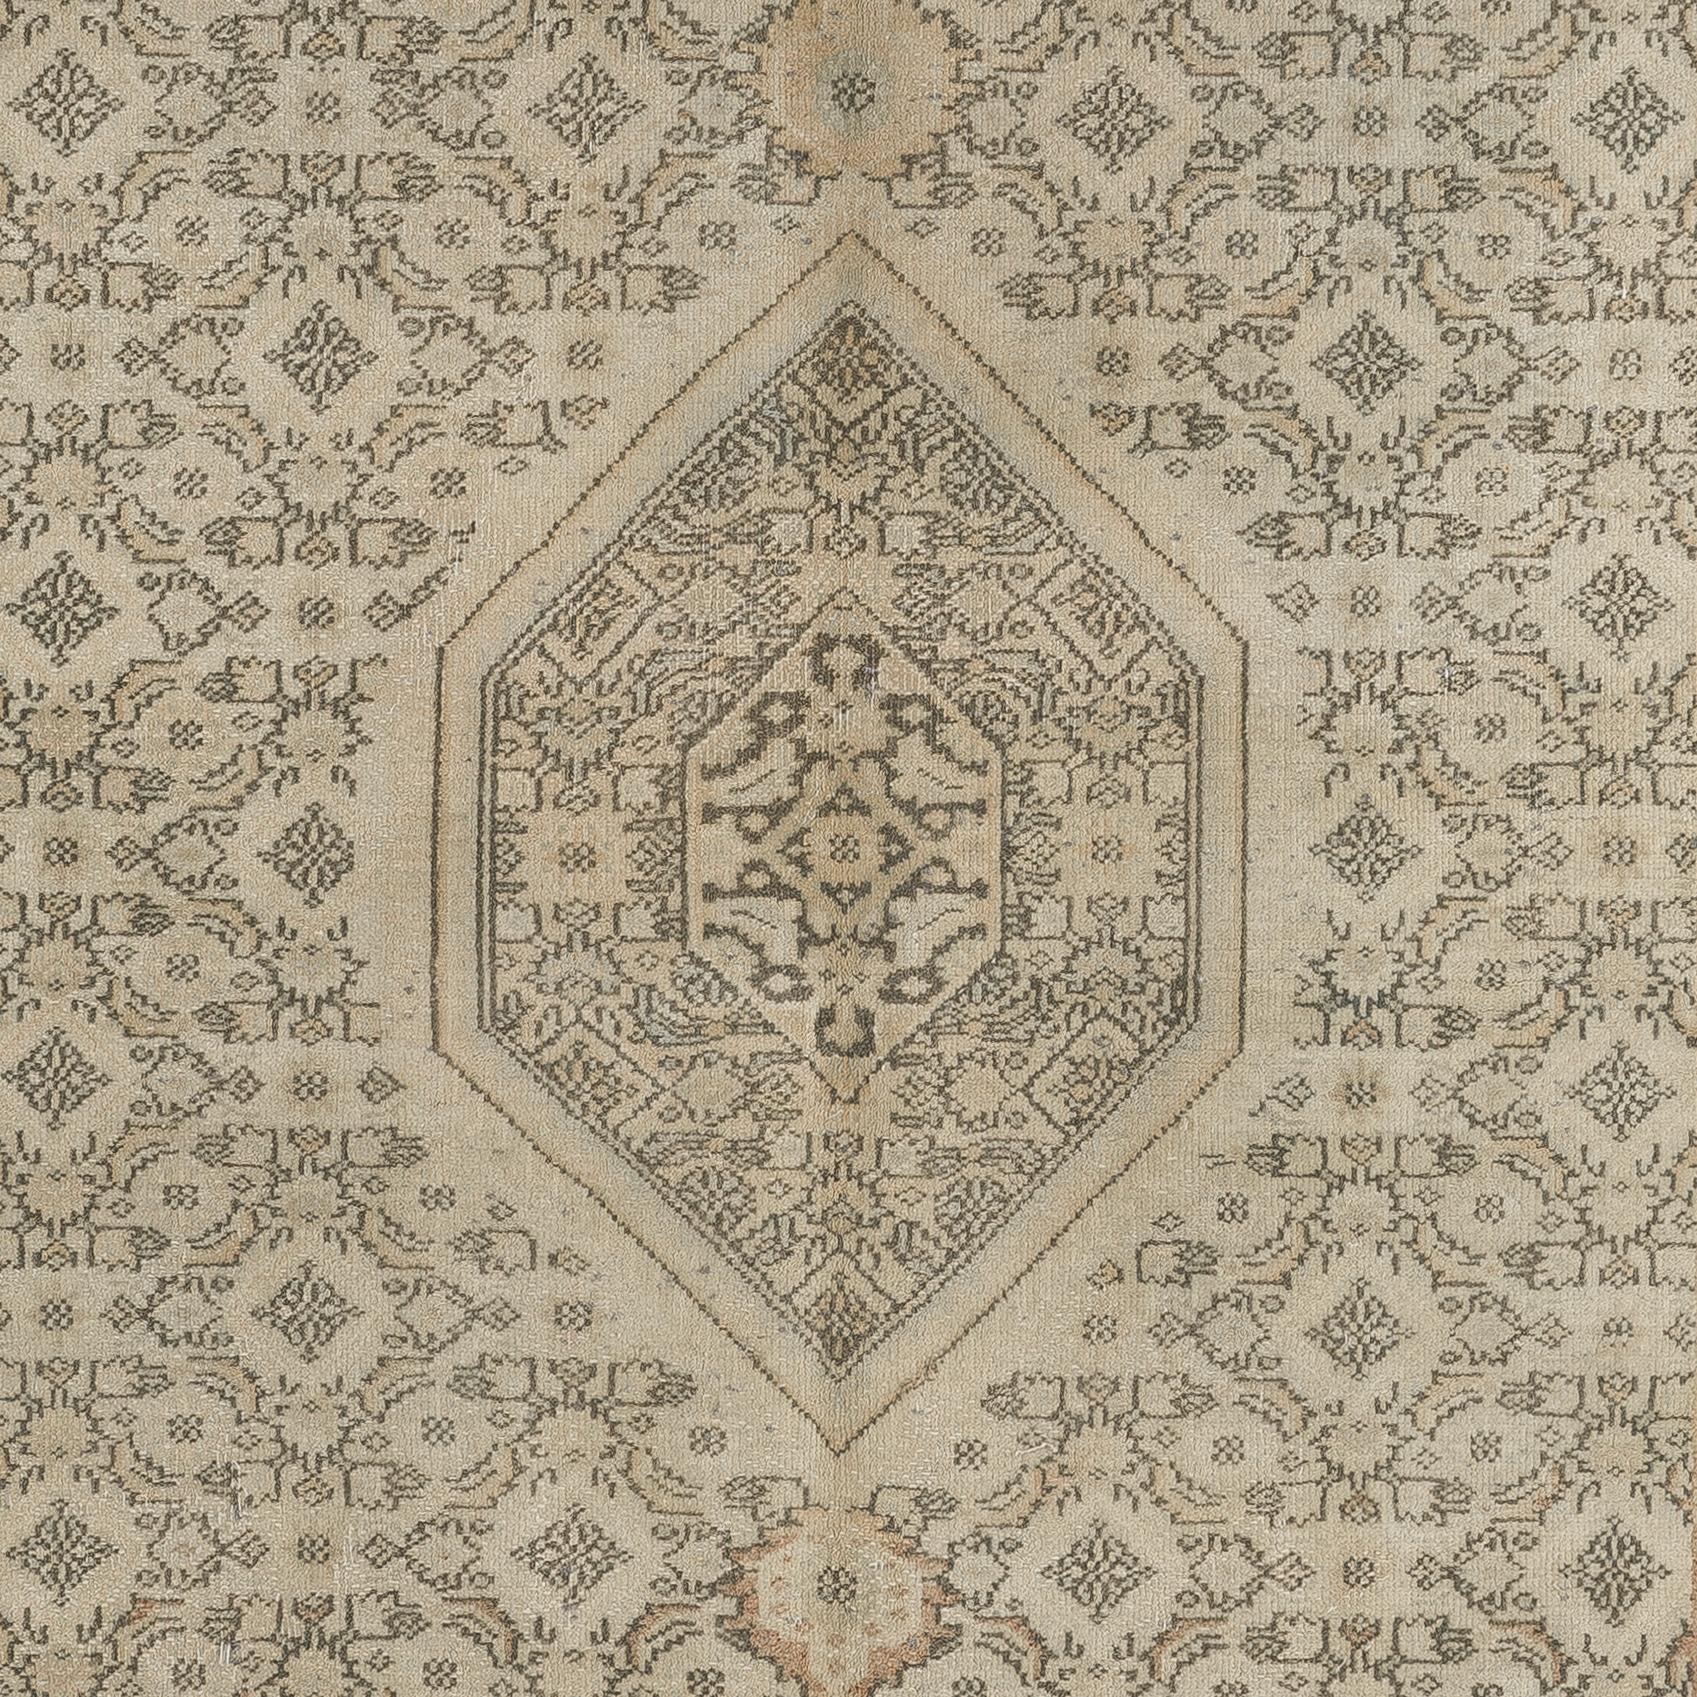 Turc 5.4x7.7 ft Hand Made Vintage Anatolian Oushak Wool Area Rug in Neutral Colors en vente